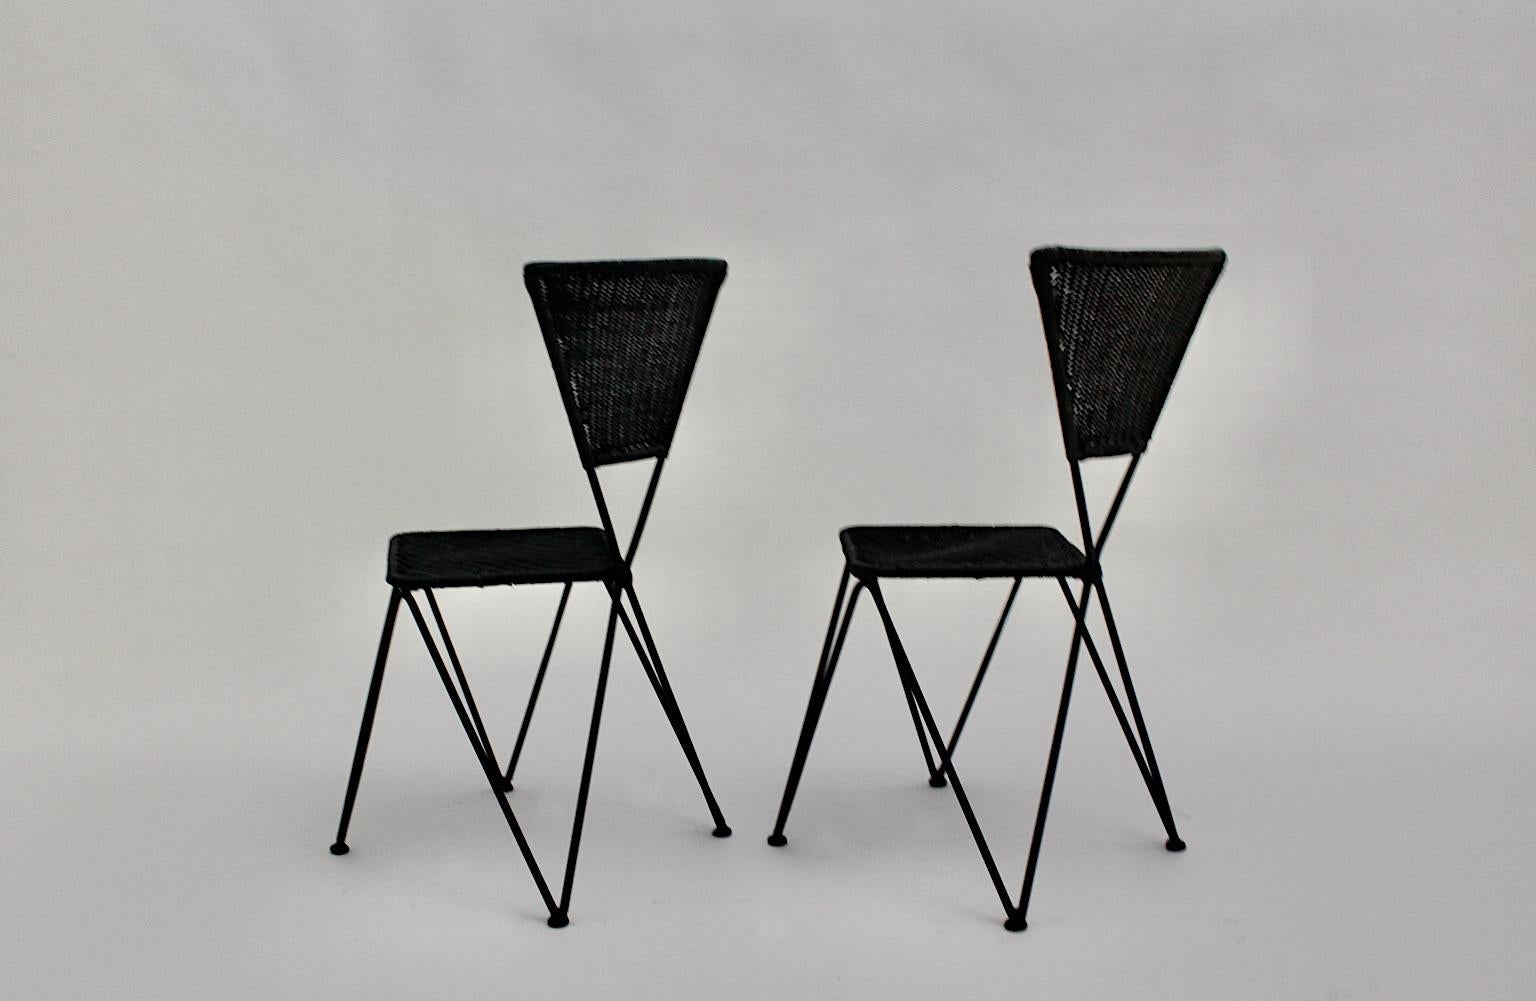 Wicker Metal Vintage Dining Chairs or Chairs Black Blue Sonett Vienna circa 1950 For Sale 2